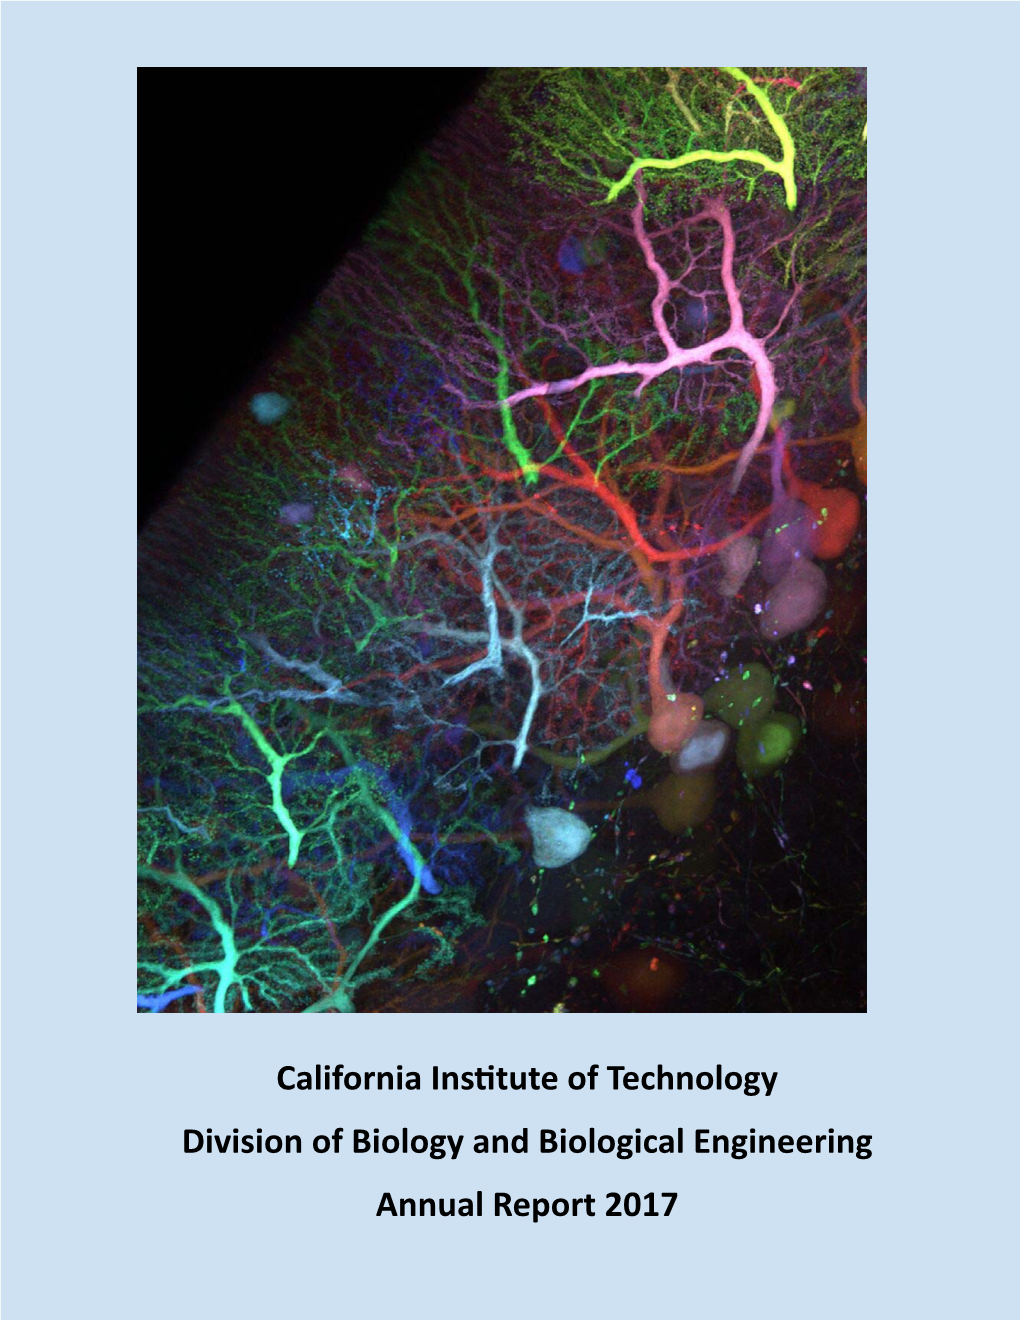 California Insɵtute of Technology Division of Biology and Biological Engineering Annual Report 2017